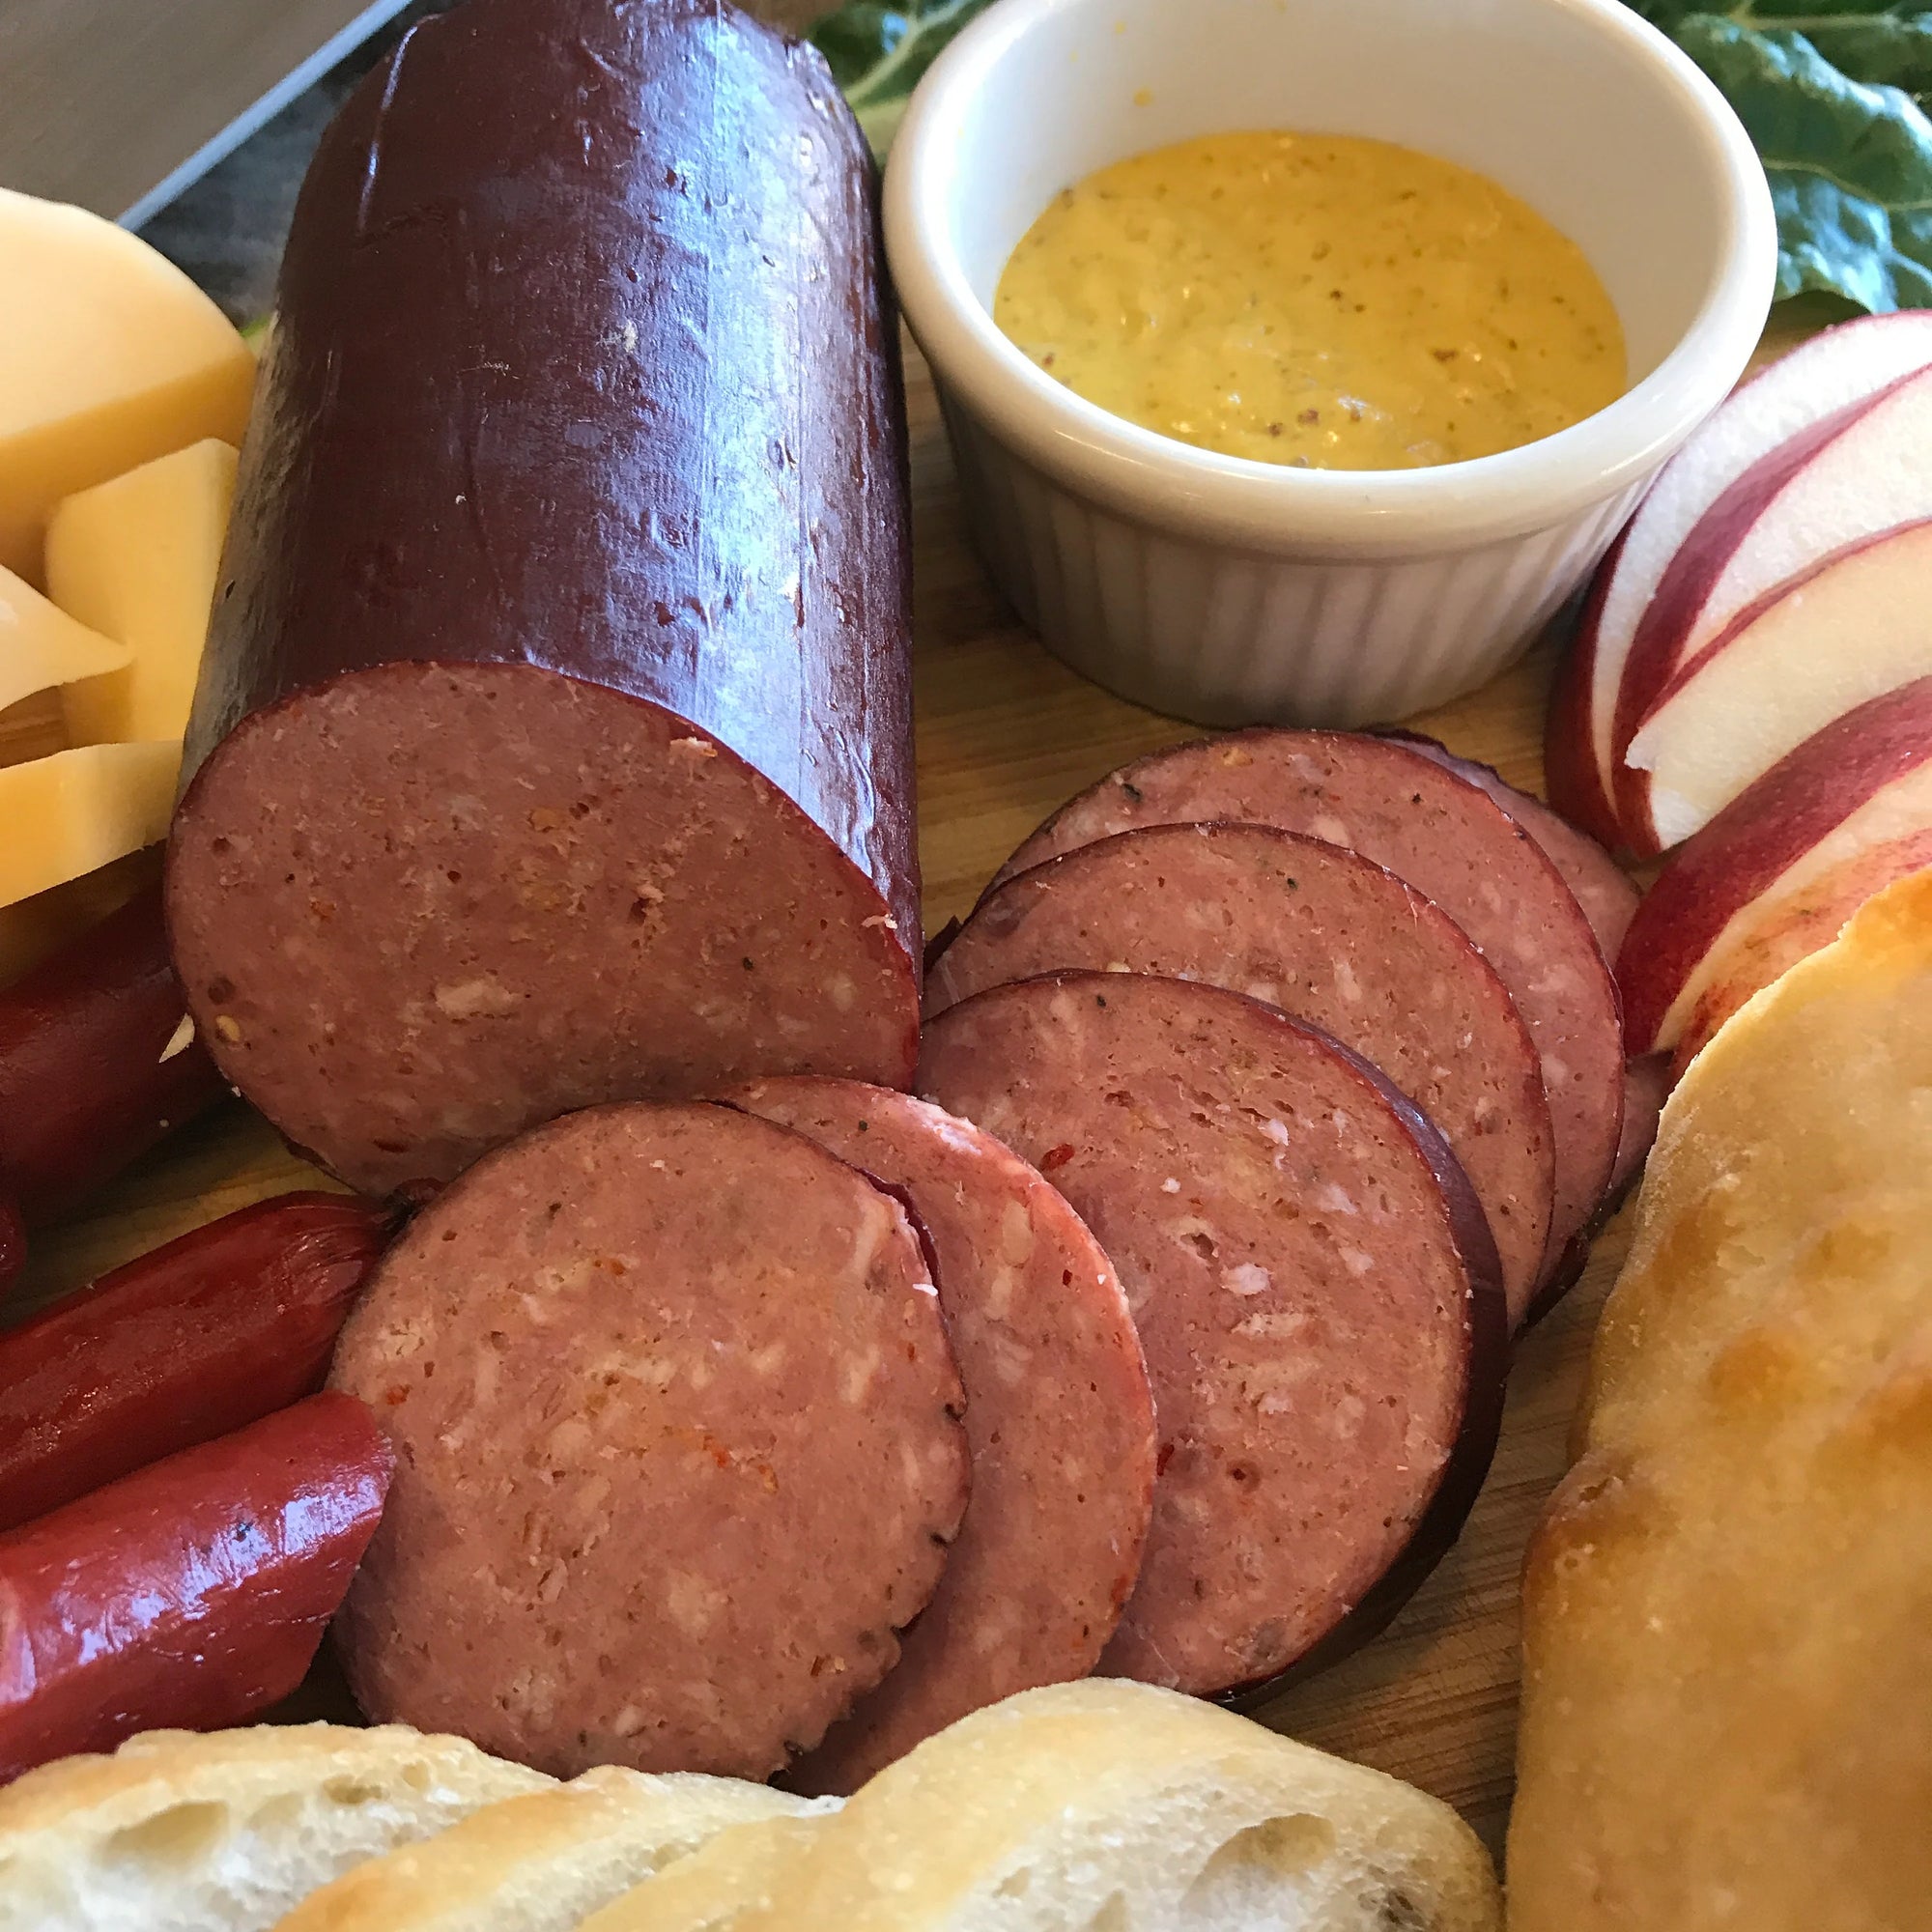 Wisconsin Sausage and Cheese Gift Box - Farm to Table, Artisan Made Quality Meats